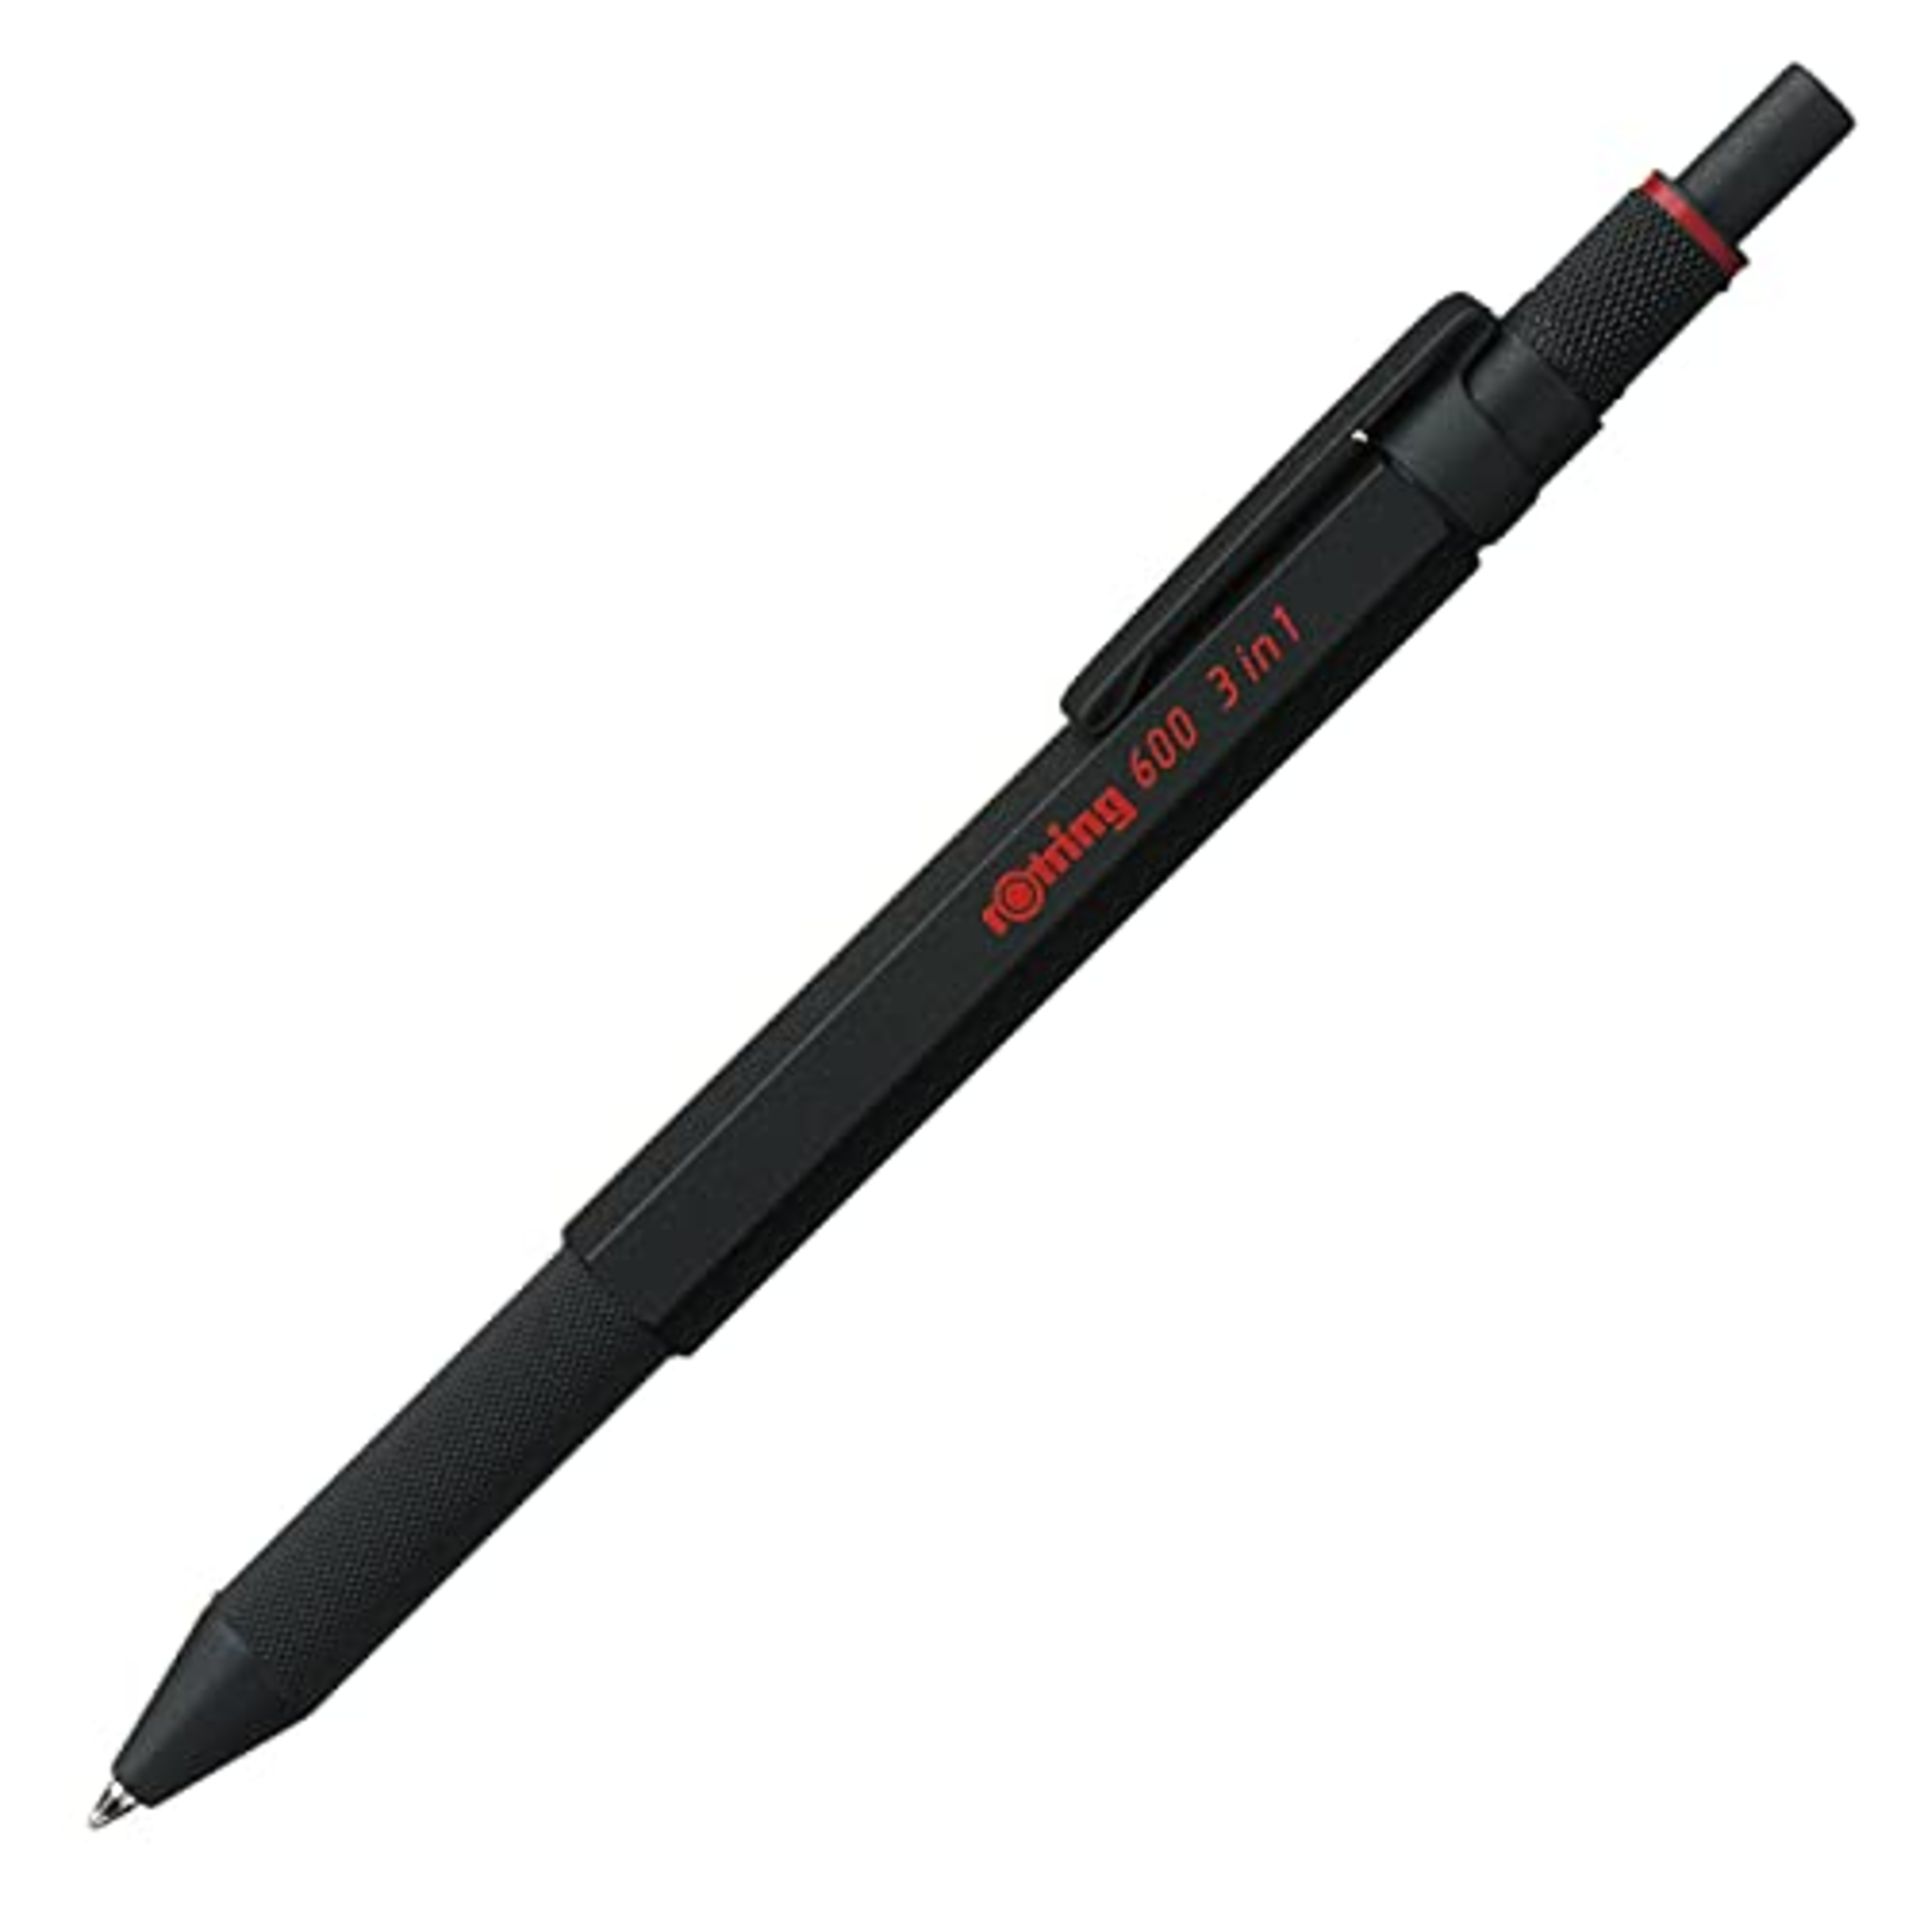 rOtring 600 Multi-colored pen and 3-in-1 mechanical pencil | 2 fine point ballpoint pe